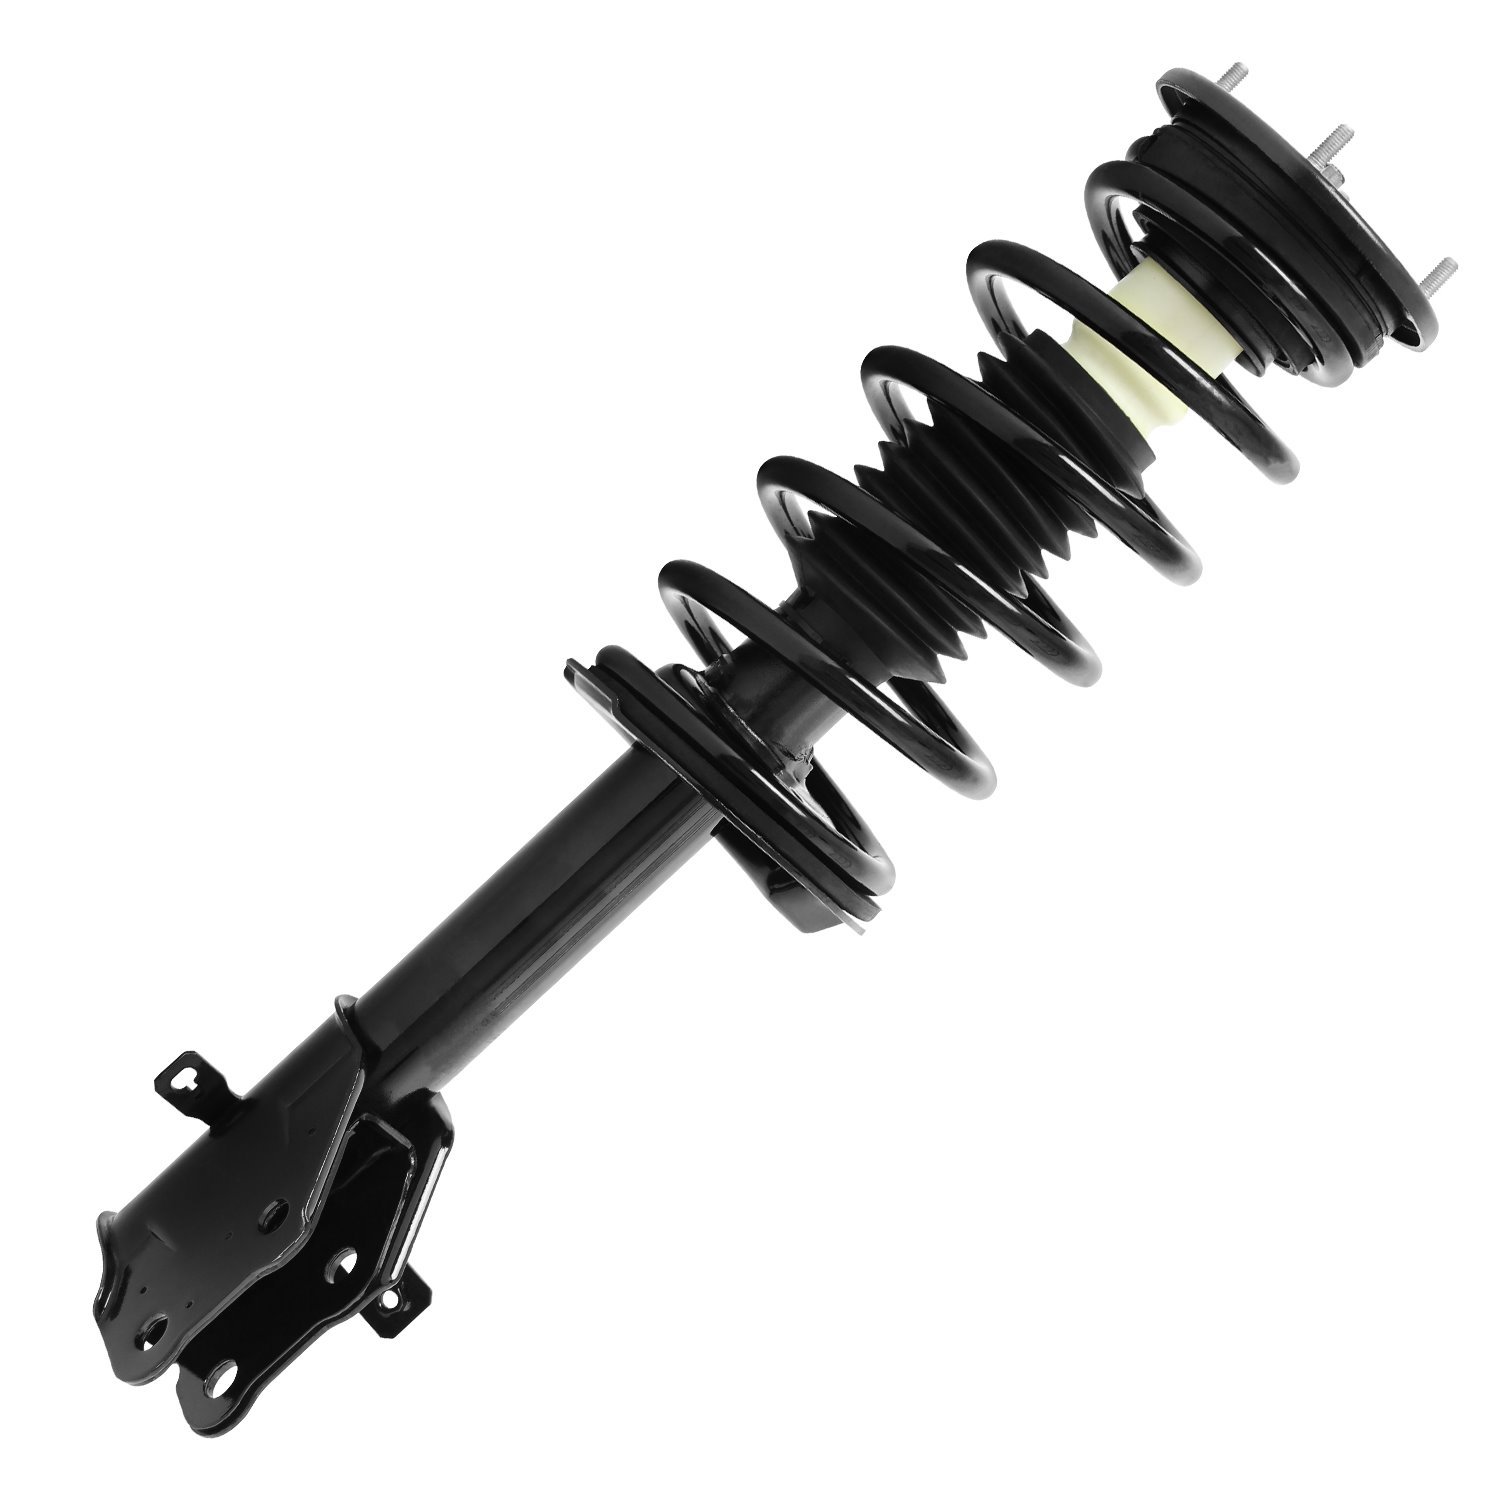 11996 Suspension Strut & Coil Spring Assembly Fits Select Ford Edge, Lincoln MKX